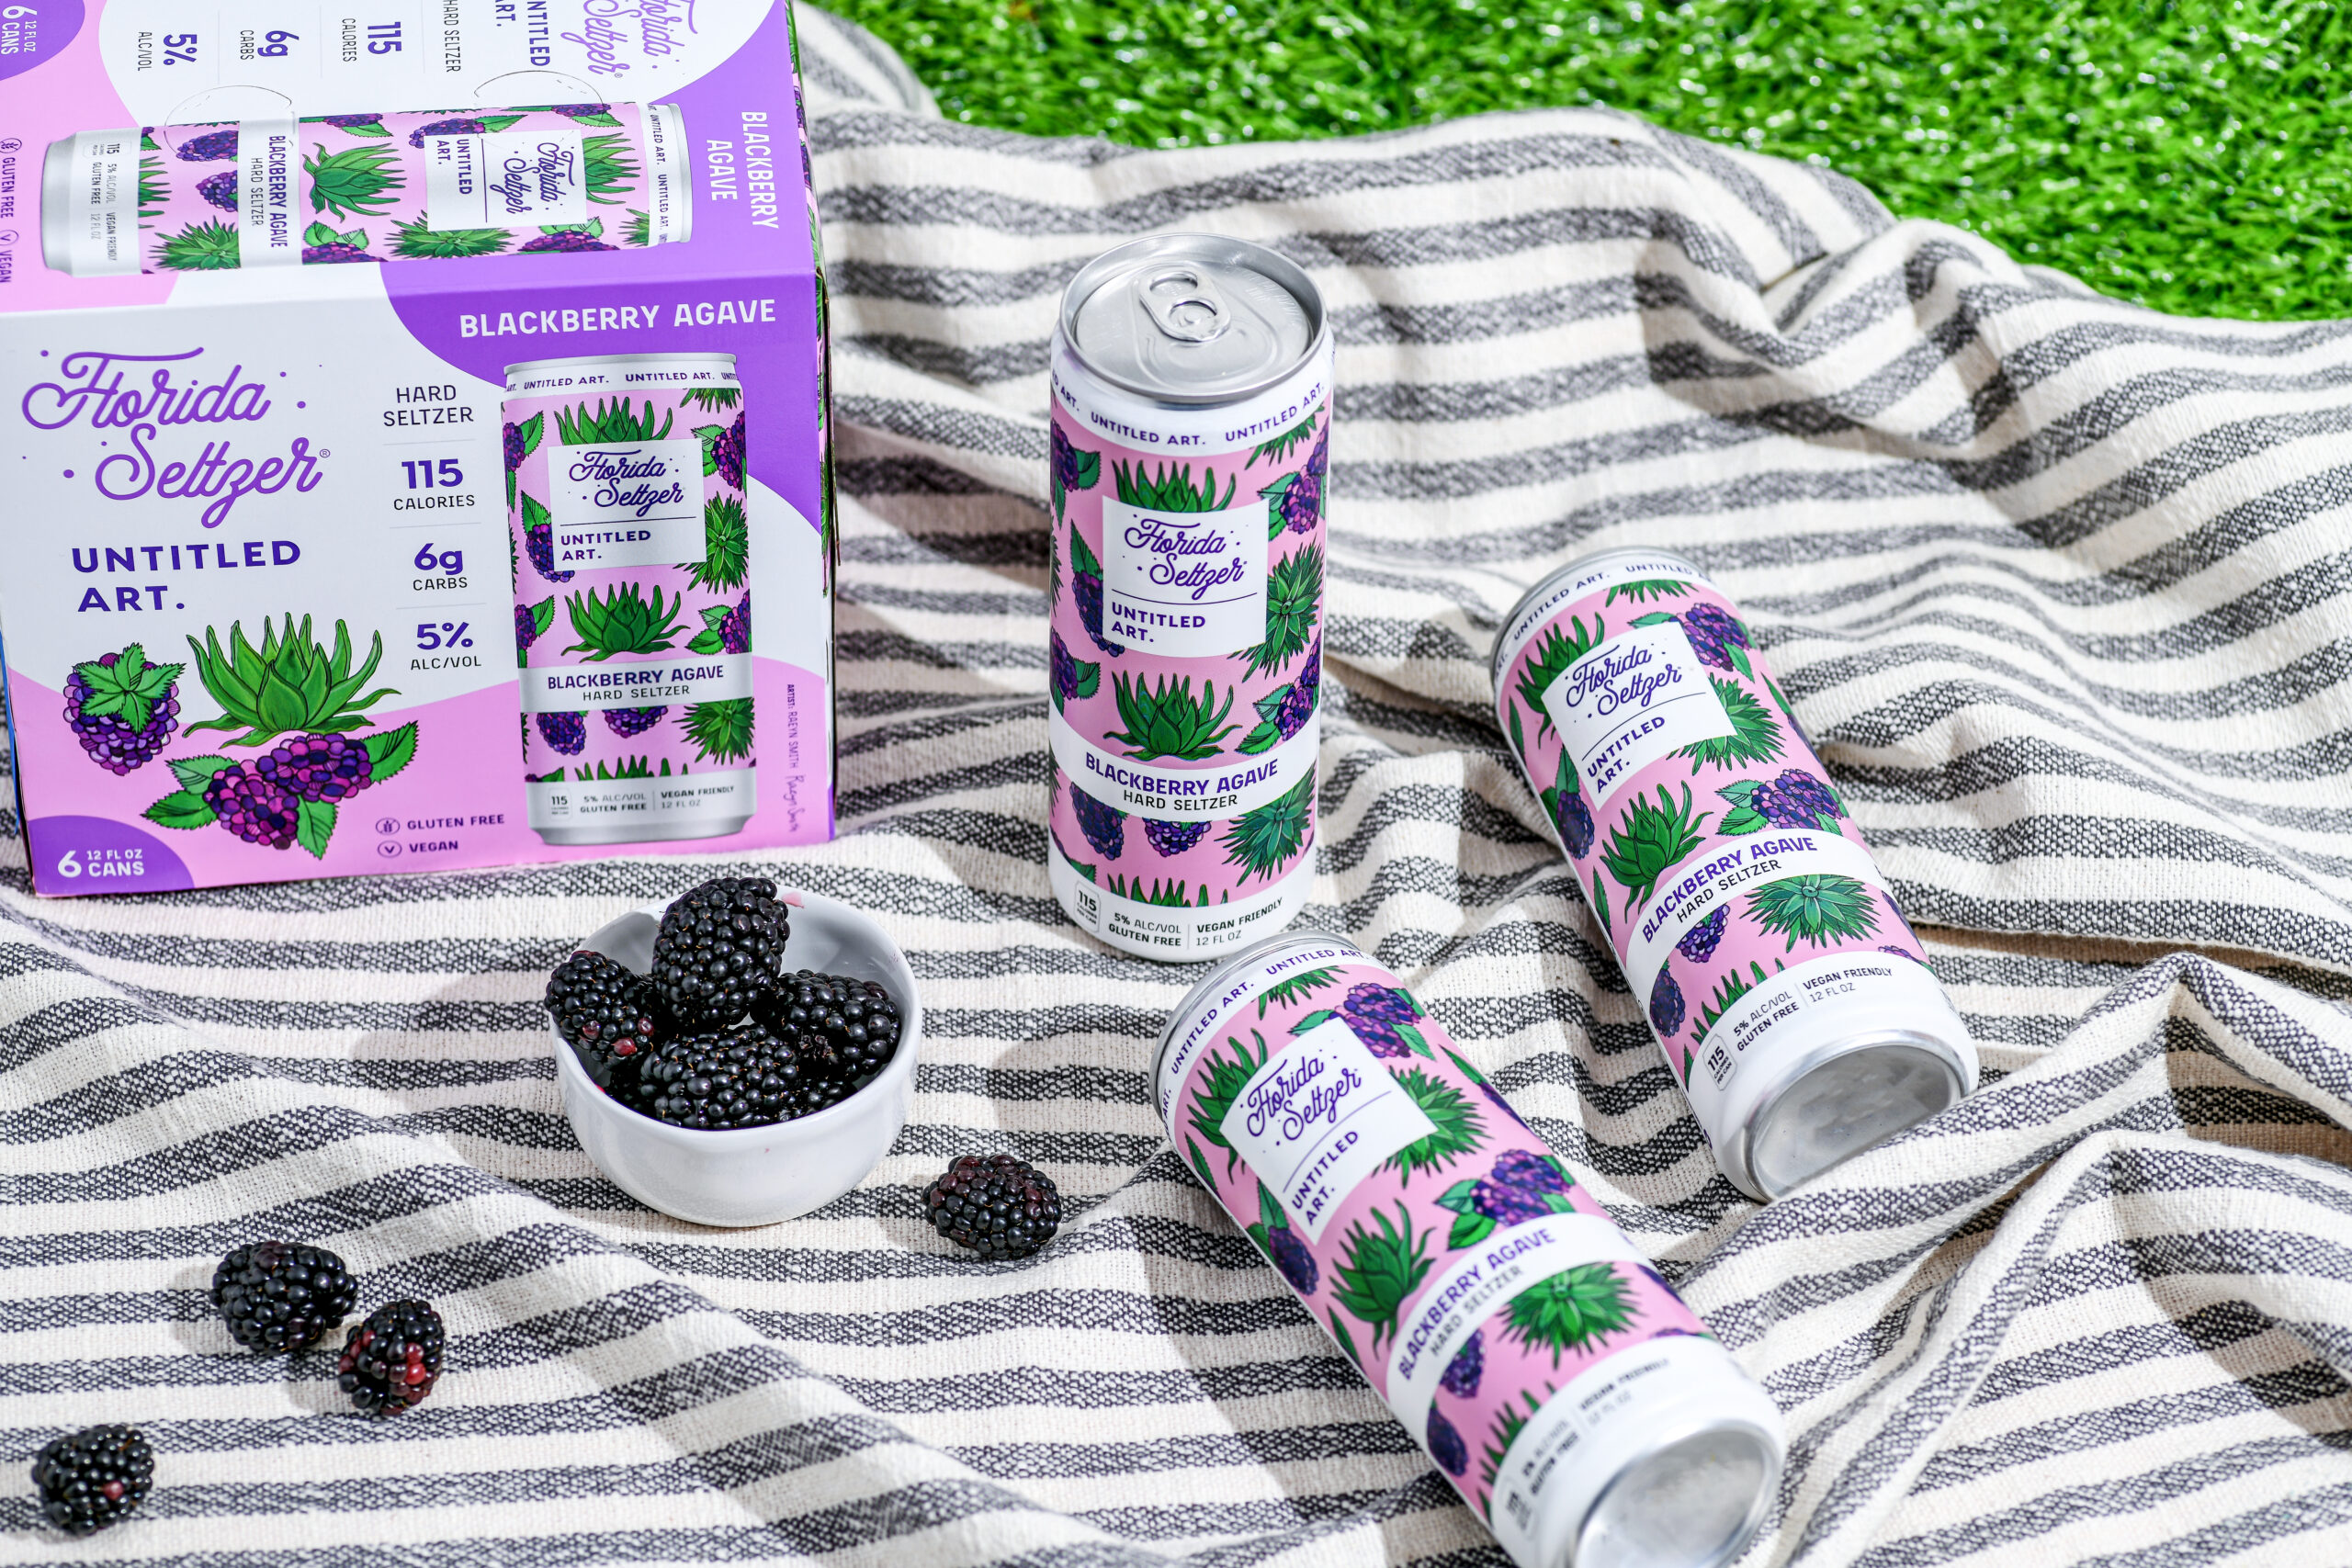 Two cans of blackberry juice on a blanket.